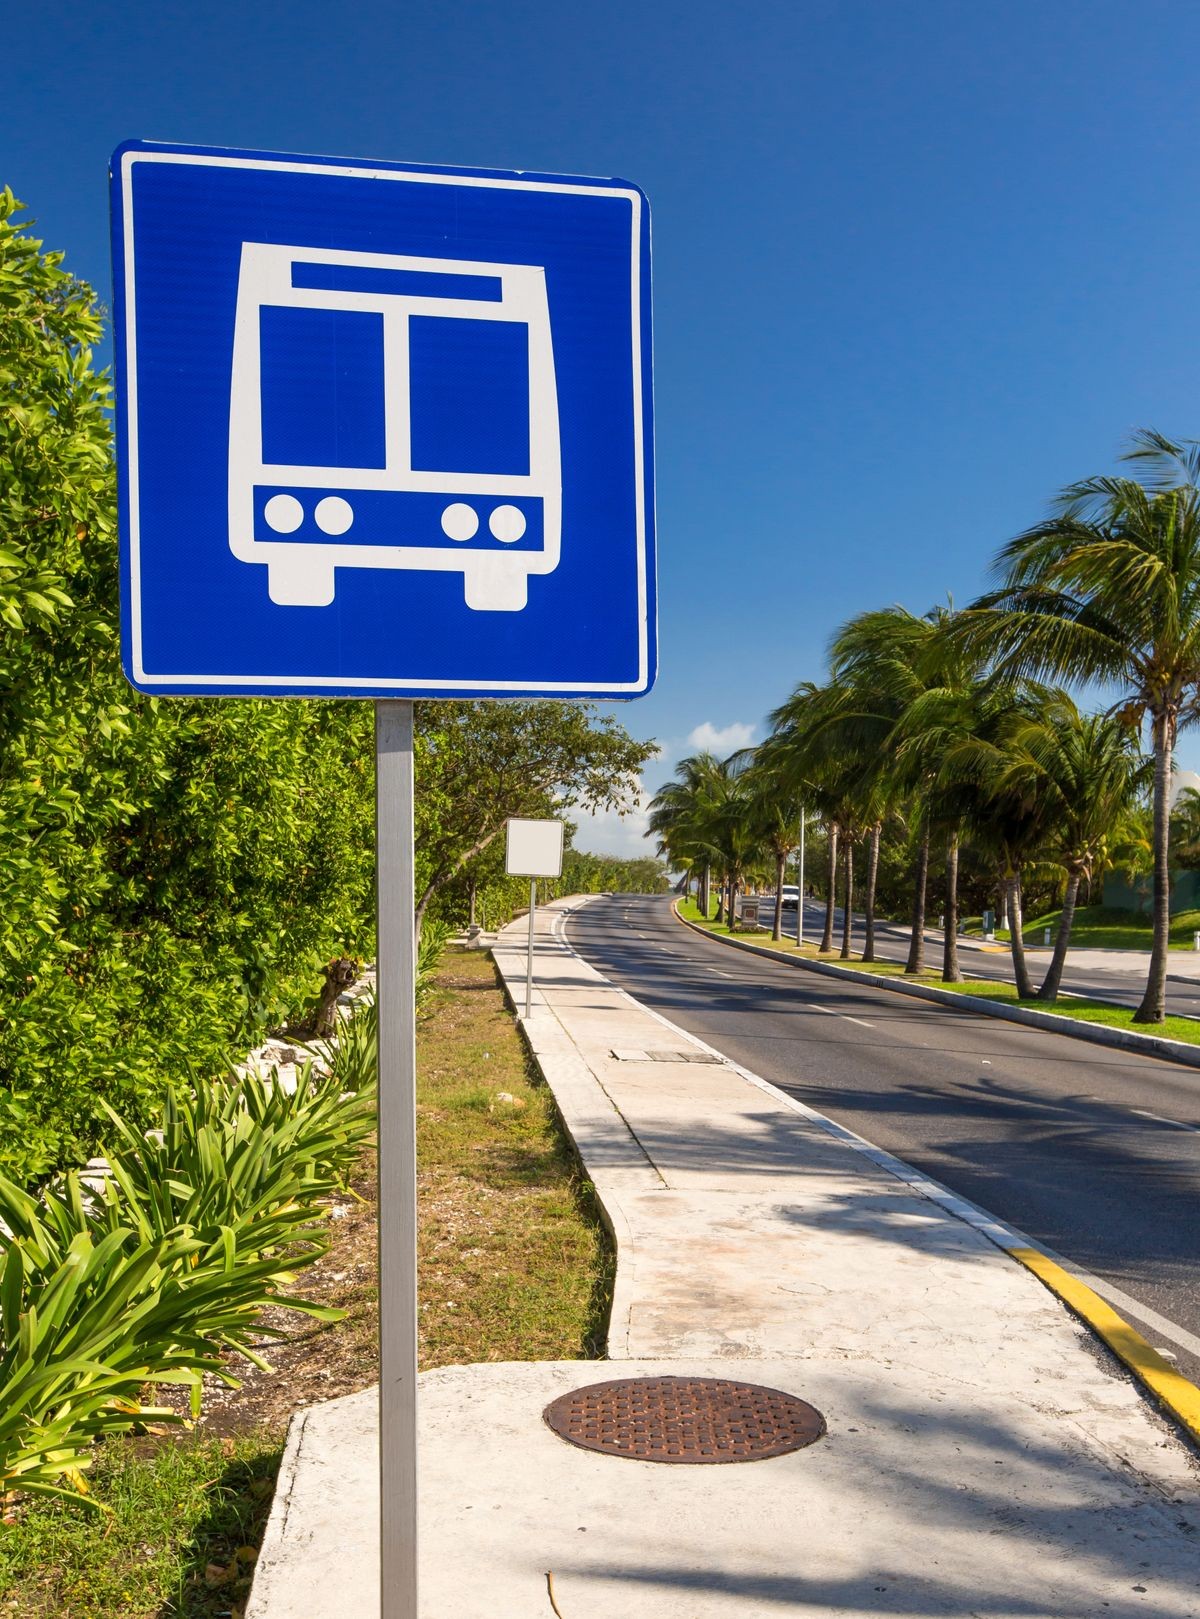 American road public bus stop sign on caribbean street road